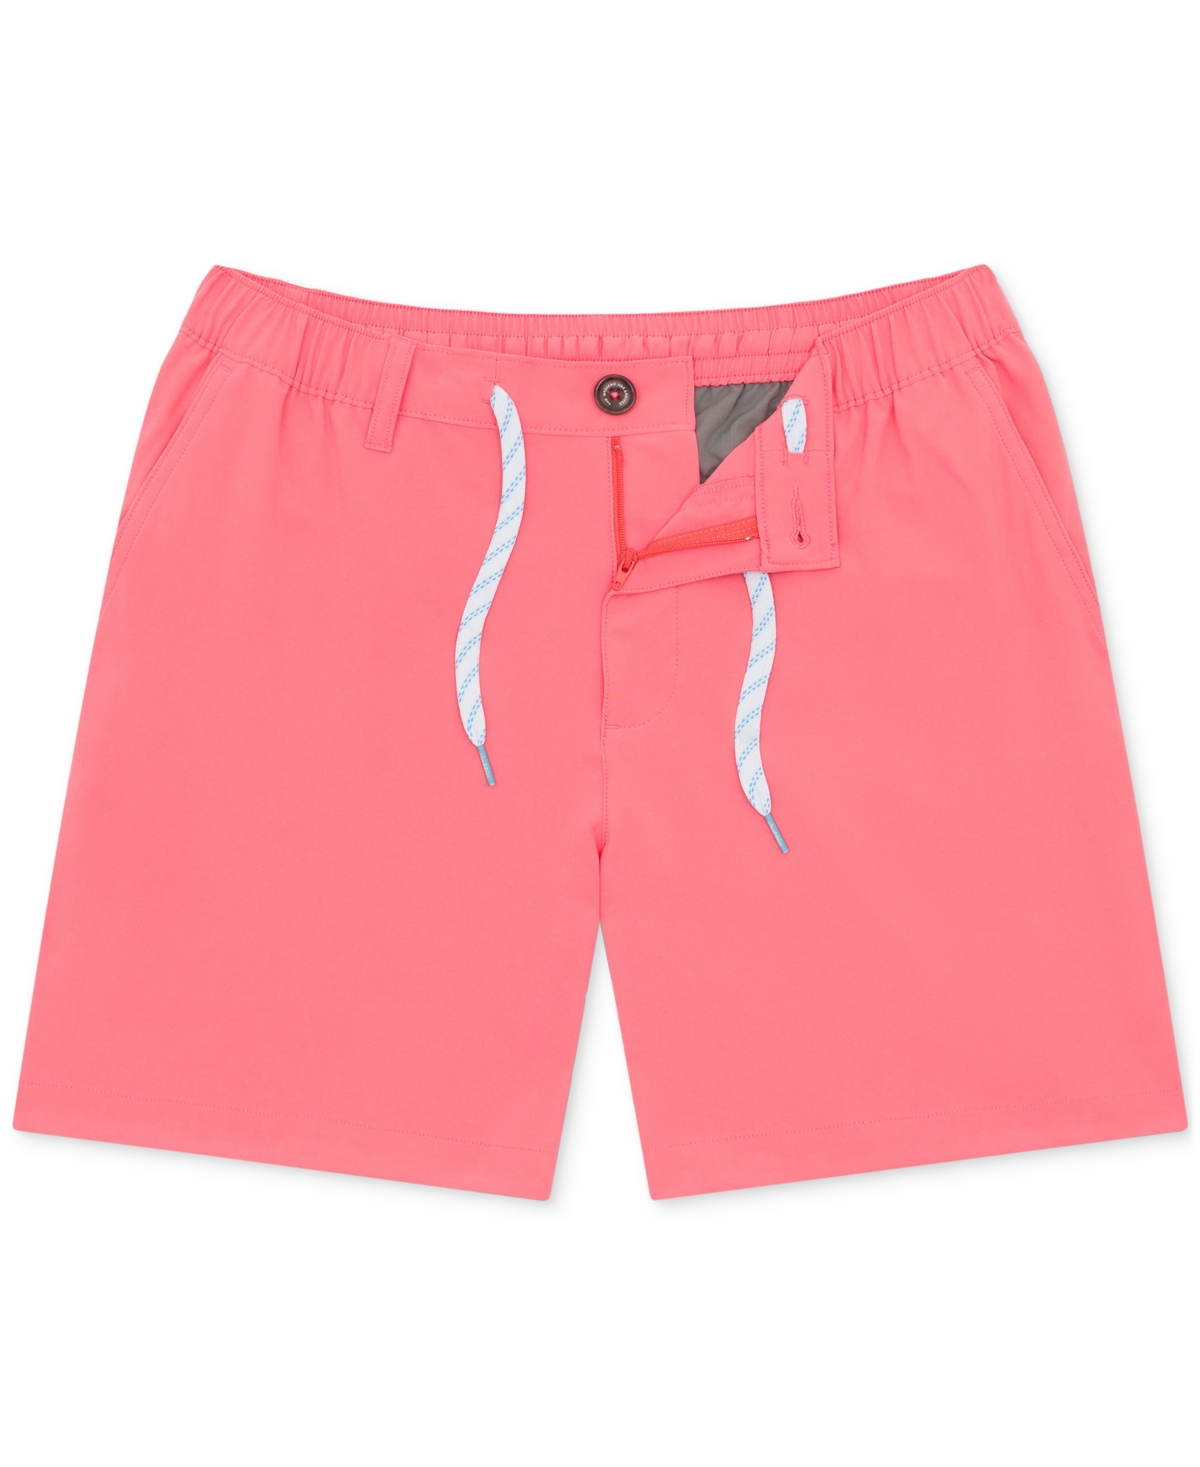 Shop Chubbies Men's The New Englands 6" Performance Shorts In Coral